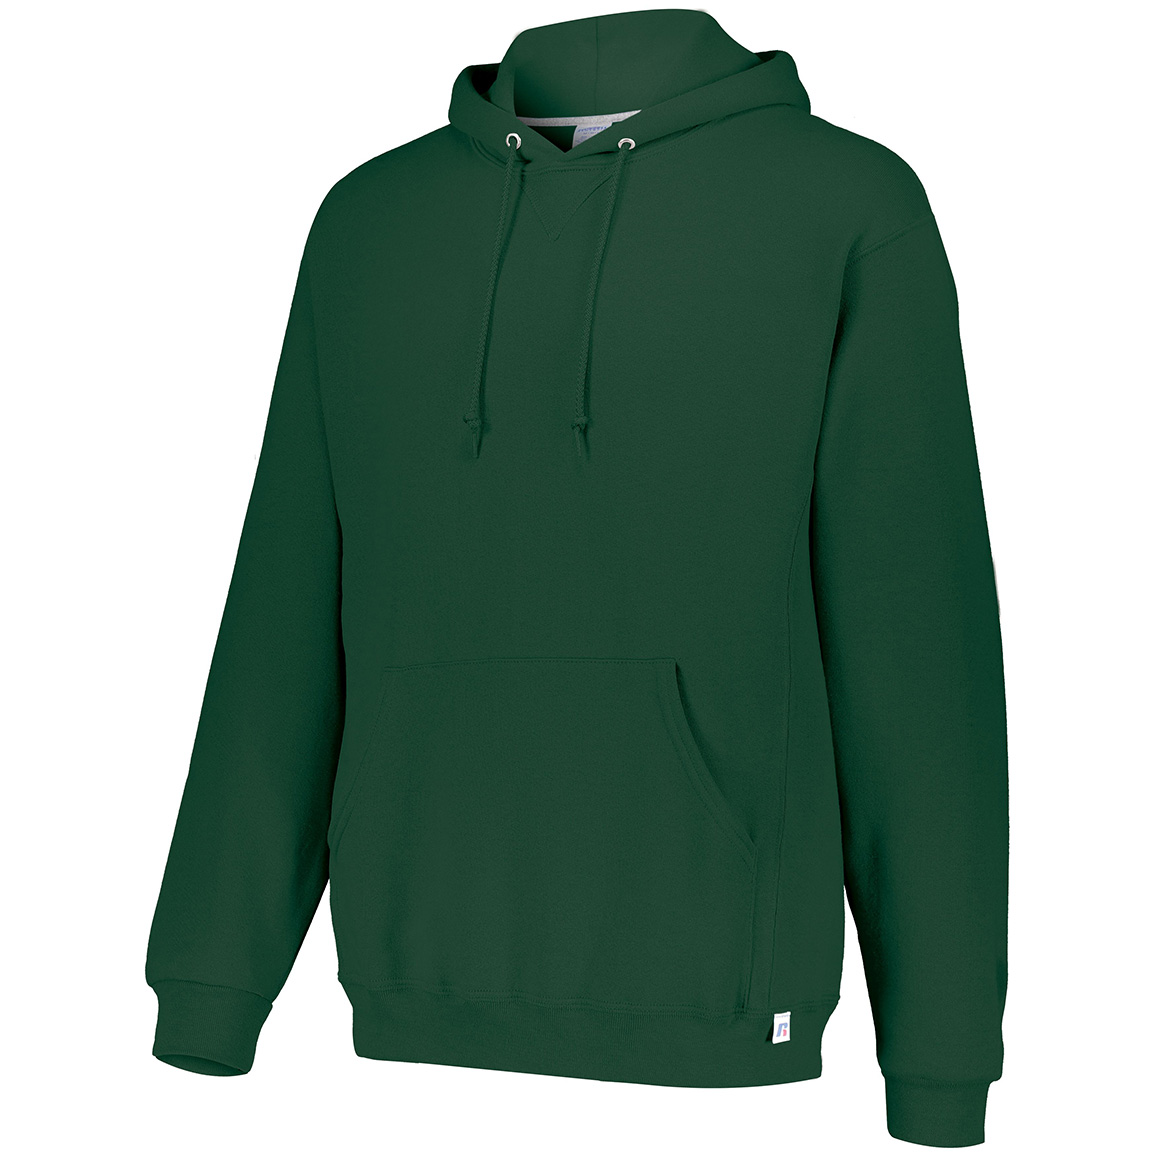 Olivet Track and Field Russell Hooded Sweatshirt – TOP Quality Imaging